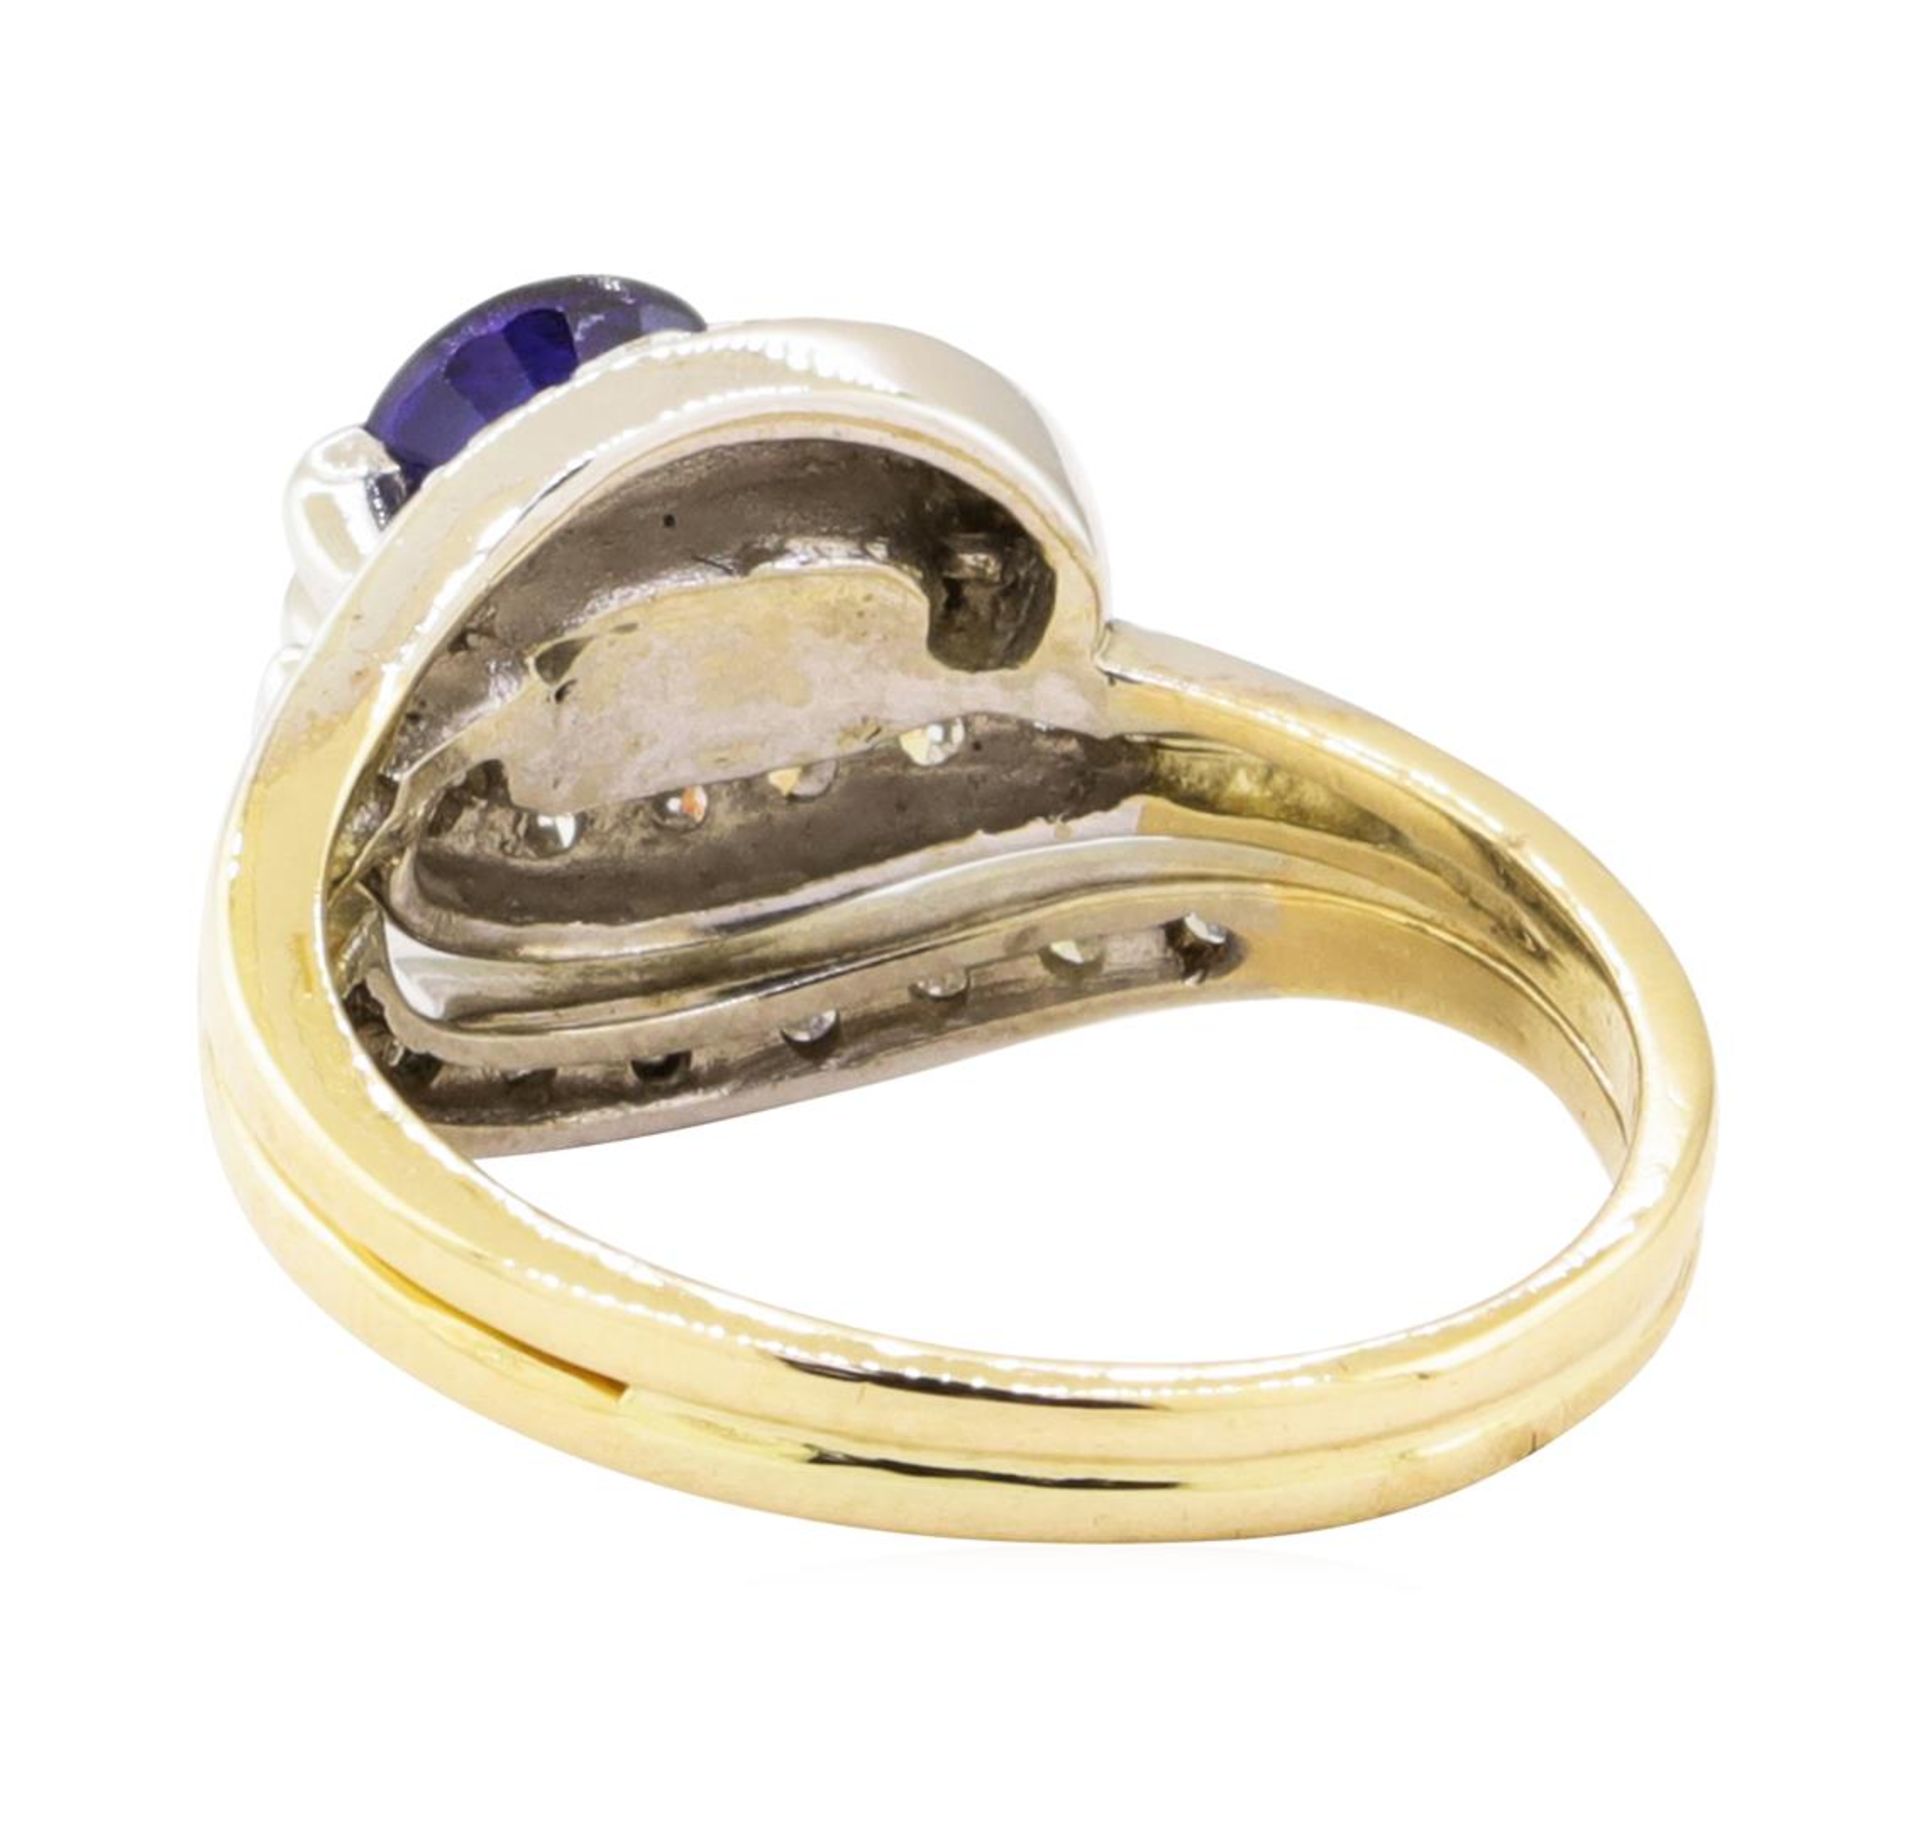 1.28 ctw Blue Sapphire And Diamond Ring And Attached Band - 14KT Yellow Gold - Image 3 of 5